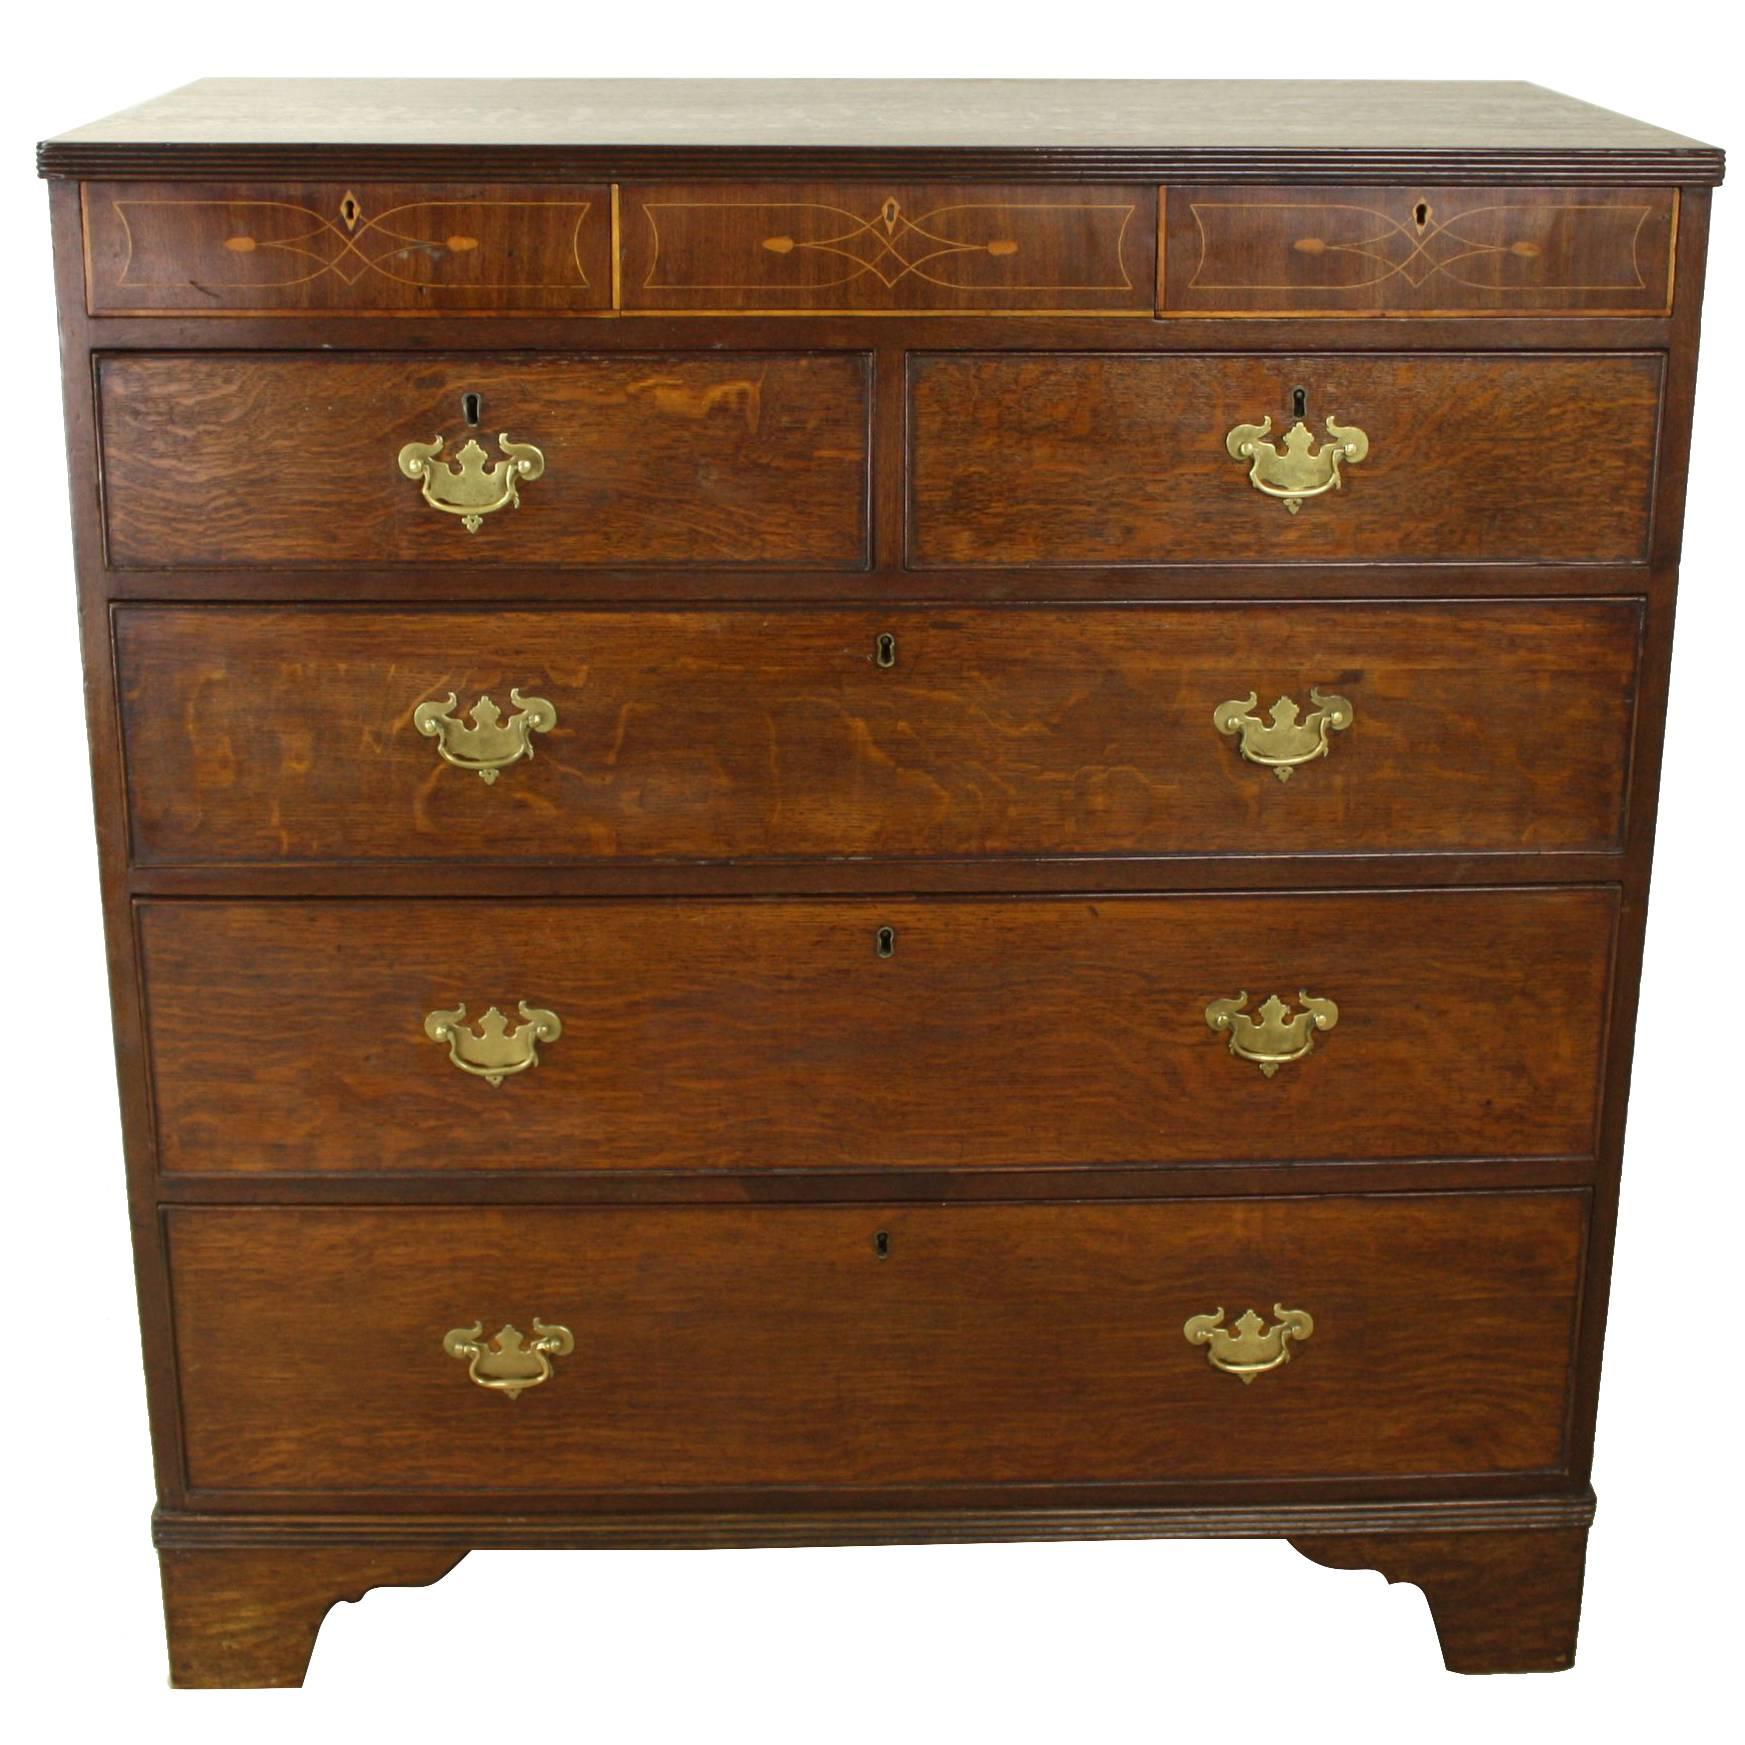 Formal Georgian Oak Chest of Drawers with Satinwood Inlay